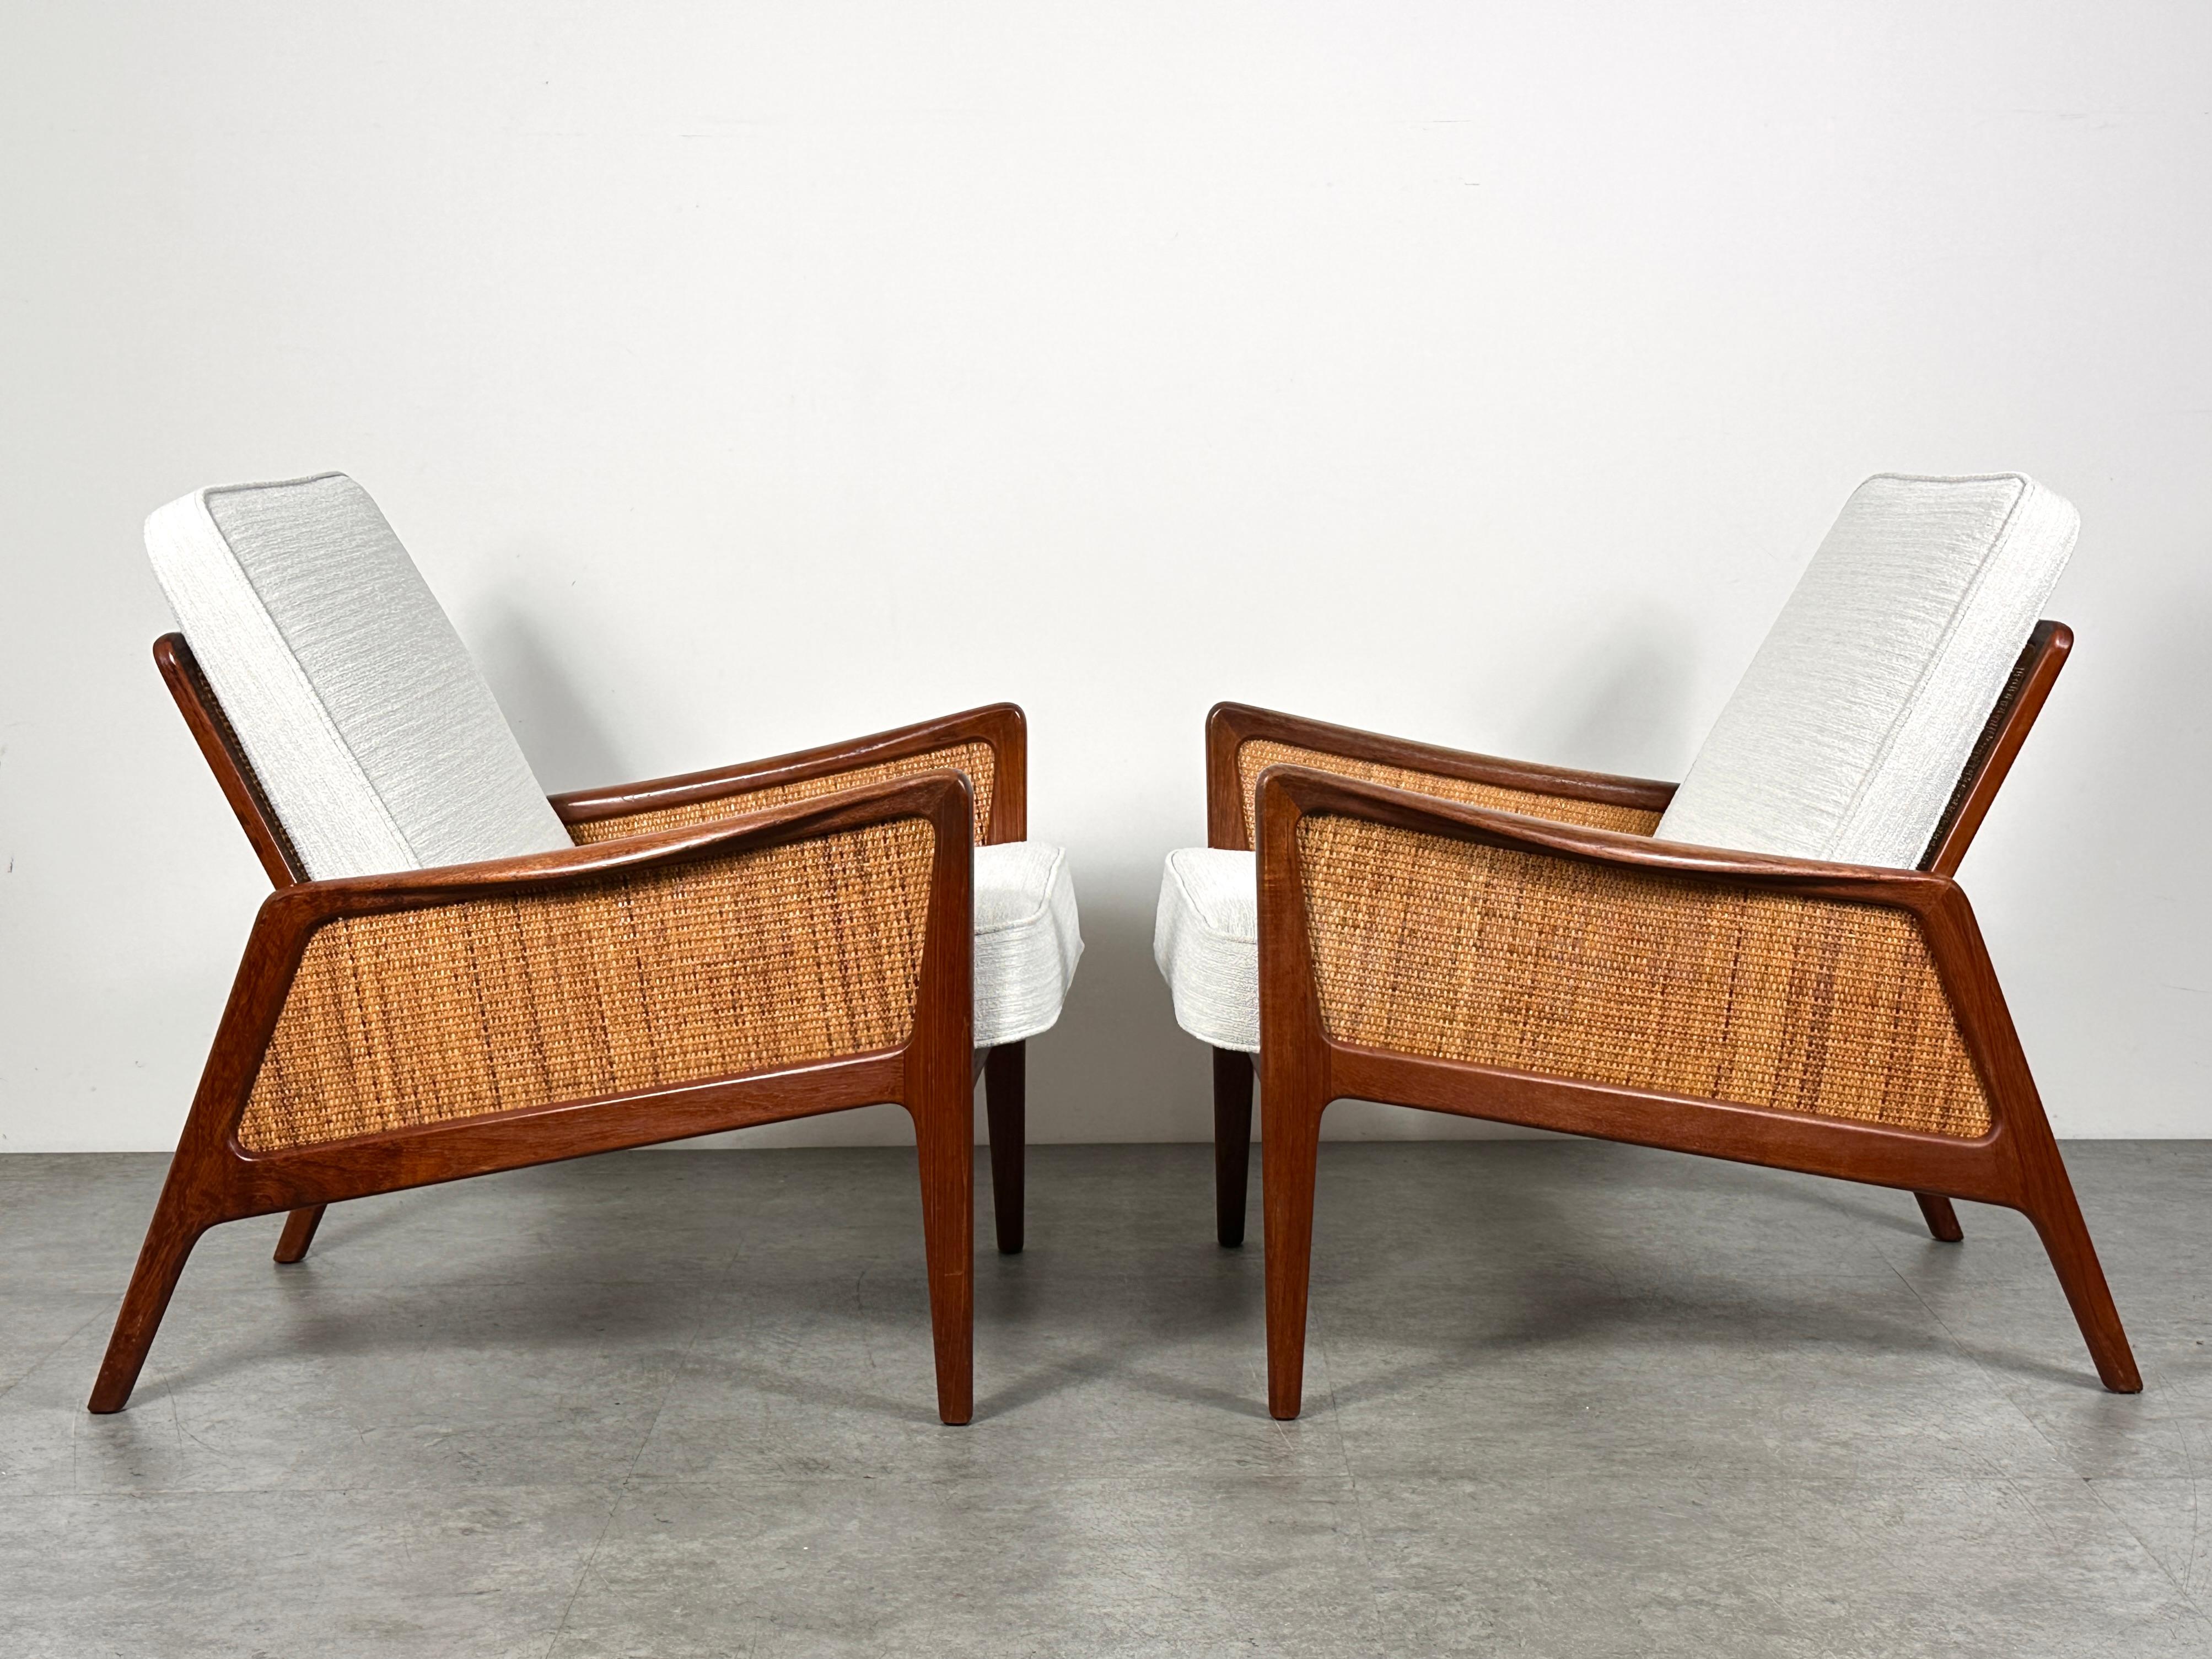 A rare pair of model FD-151 lounge chairs by Peter Hvidt and Orla Molgaard Nielsen
Designed in 1956 for France and Daverkosen
Sculptural solid teak frames with woven cane panel sides and back

Manufacturer markings to frame interior 

26